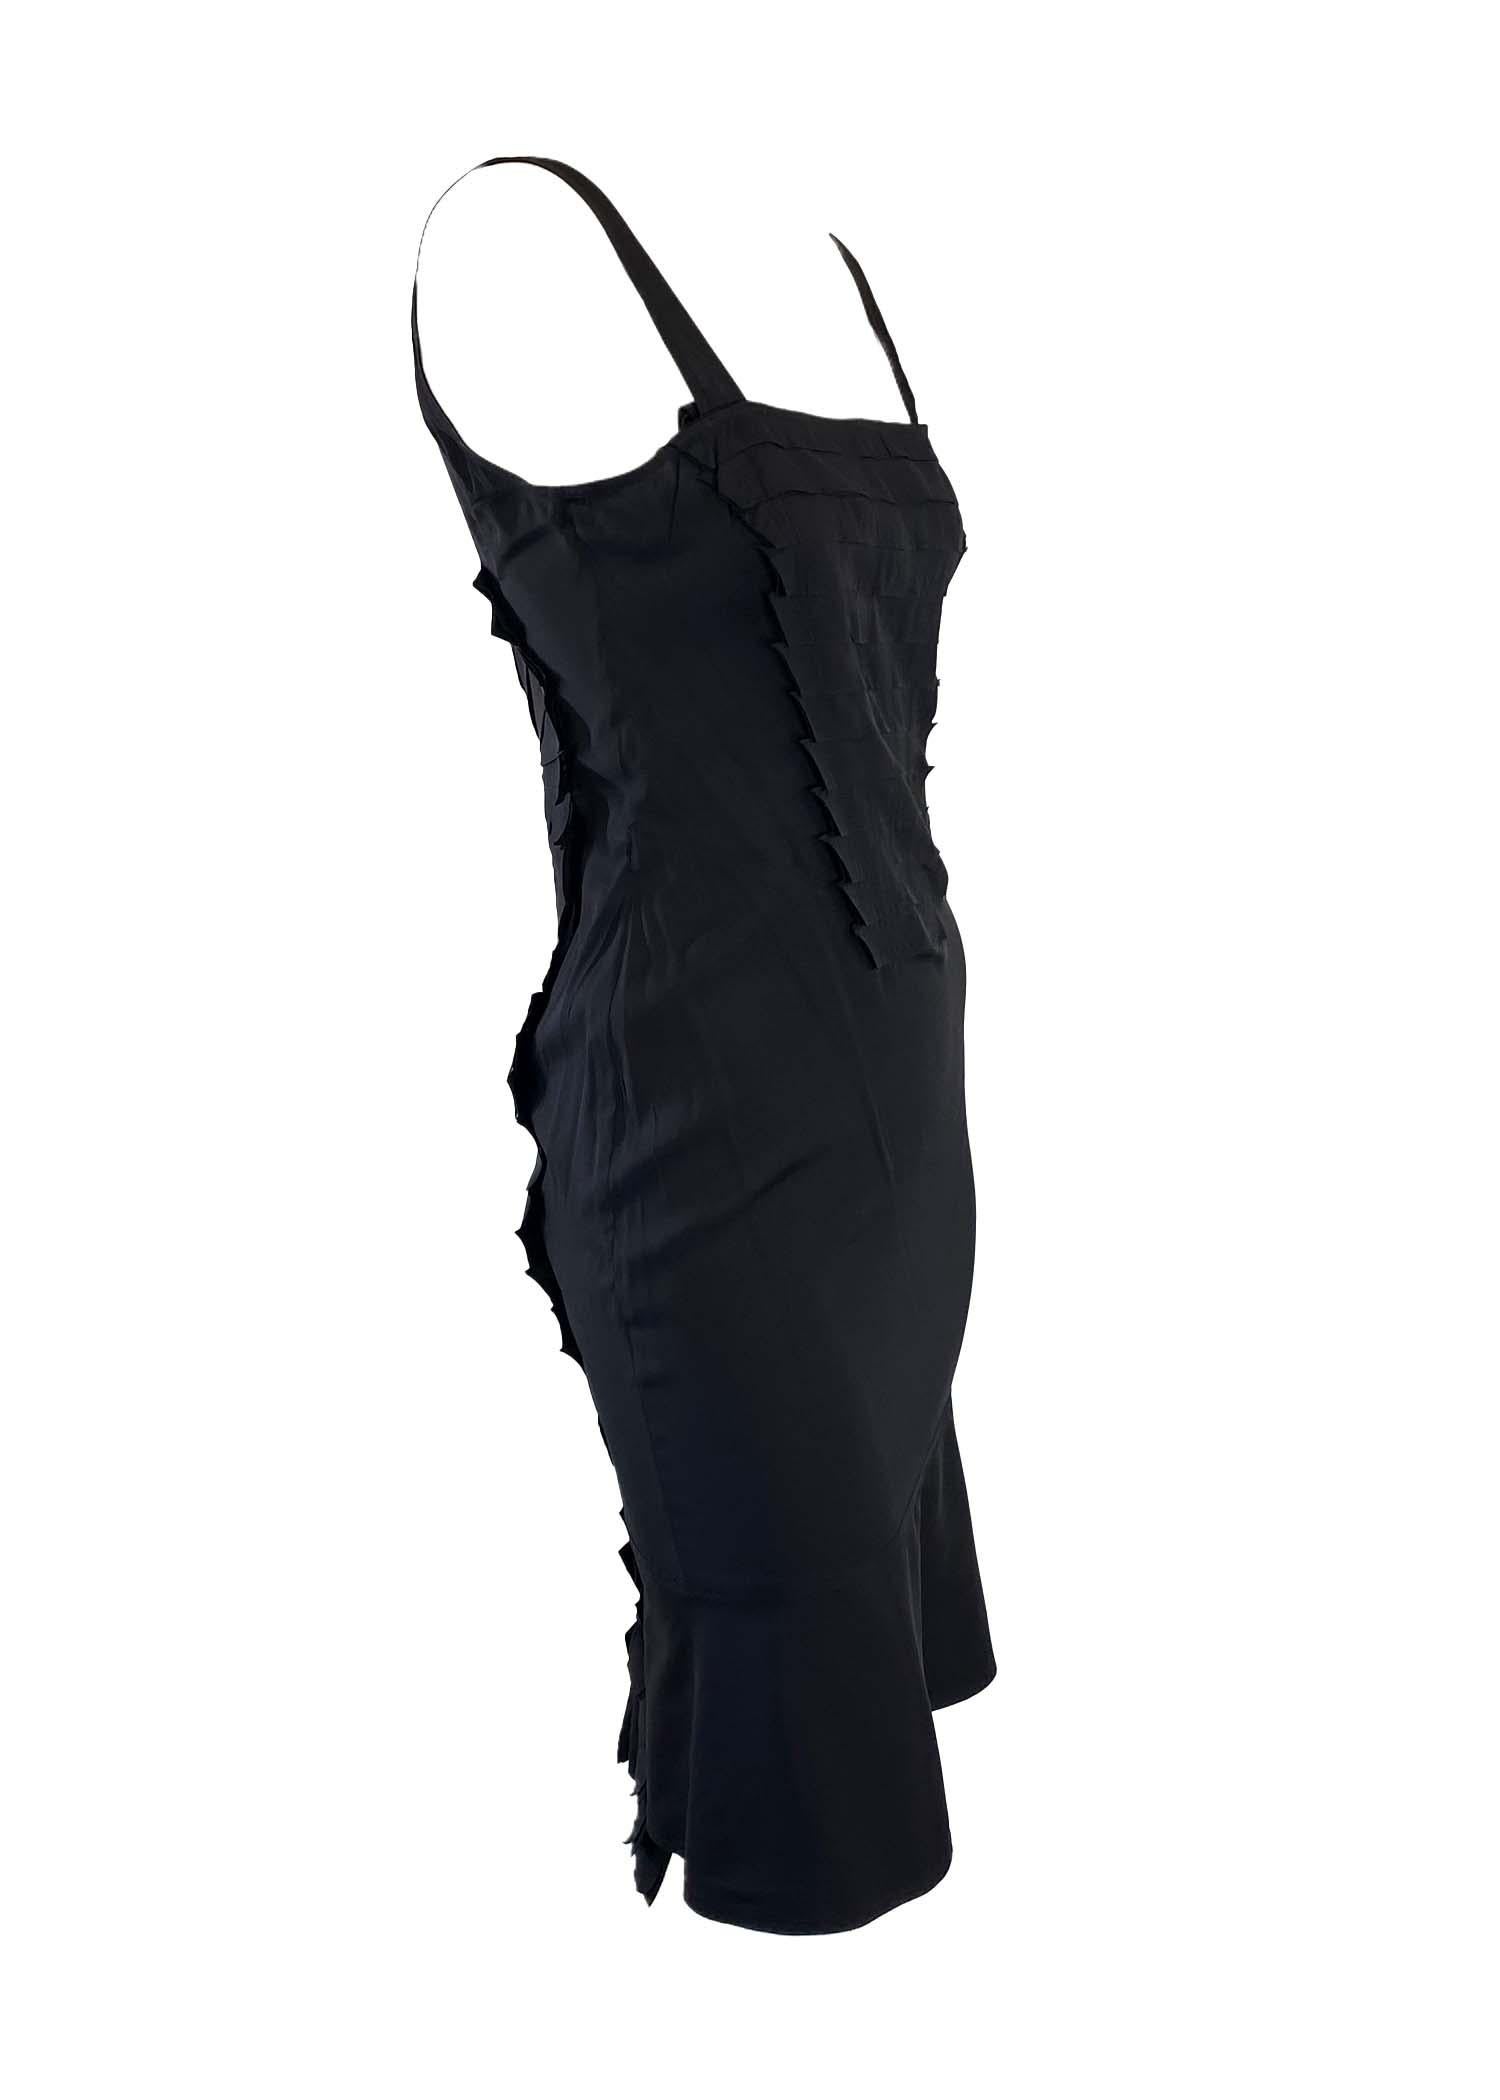 S/S 2004 Gucci by Tom Ford Black Ribbon Appliqué Sleeveless Stretch Silk Dress For Sale 1